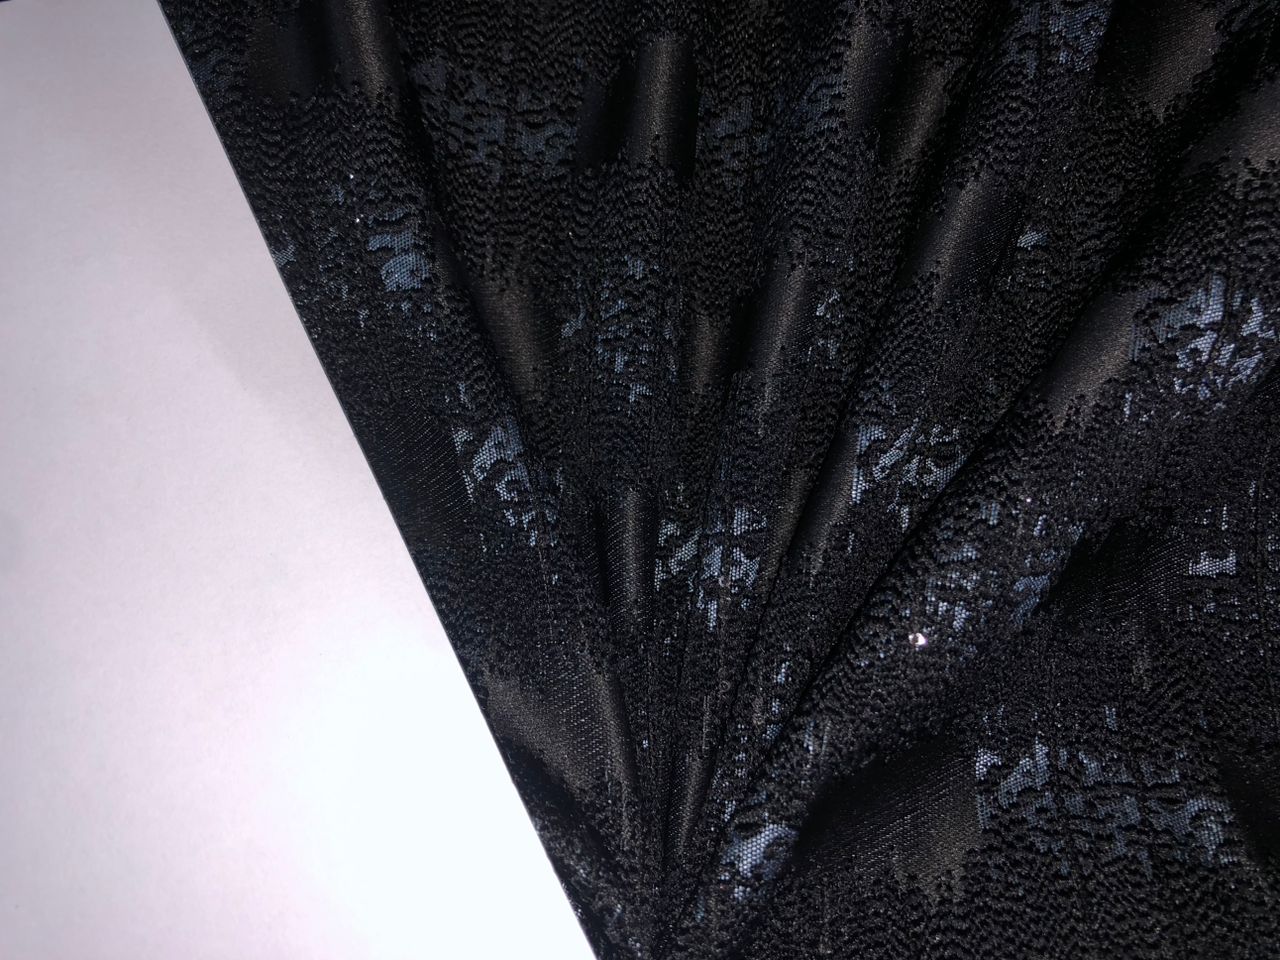 Brocade rich fabric black and grey jacquard with subtle metallic silver 58" wide BRO913[4]